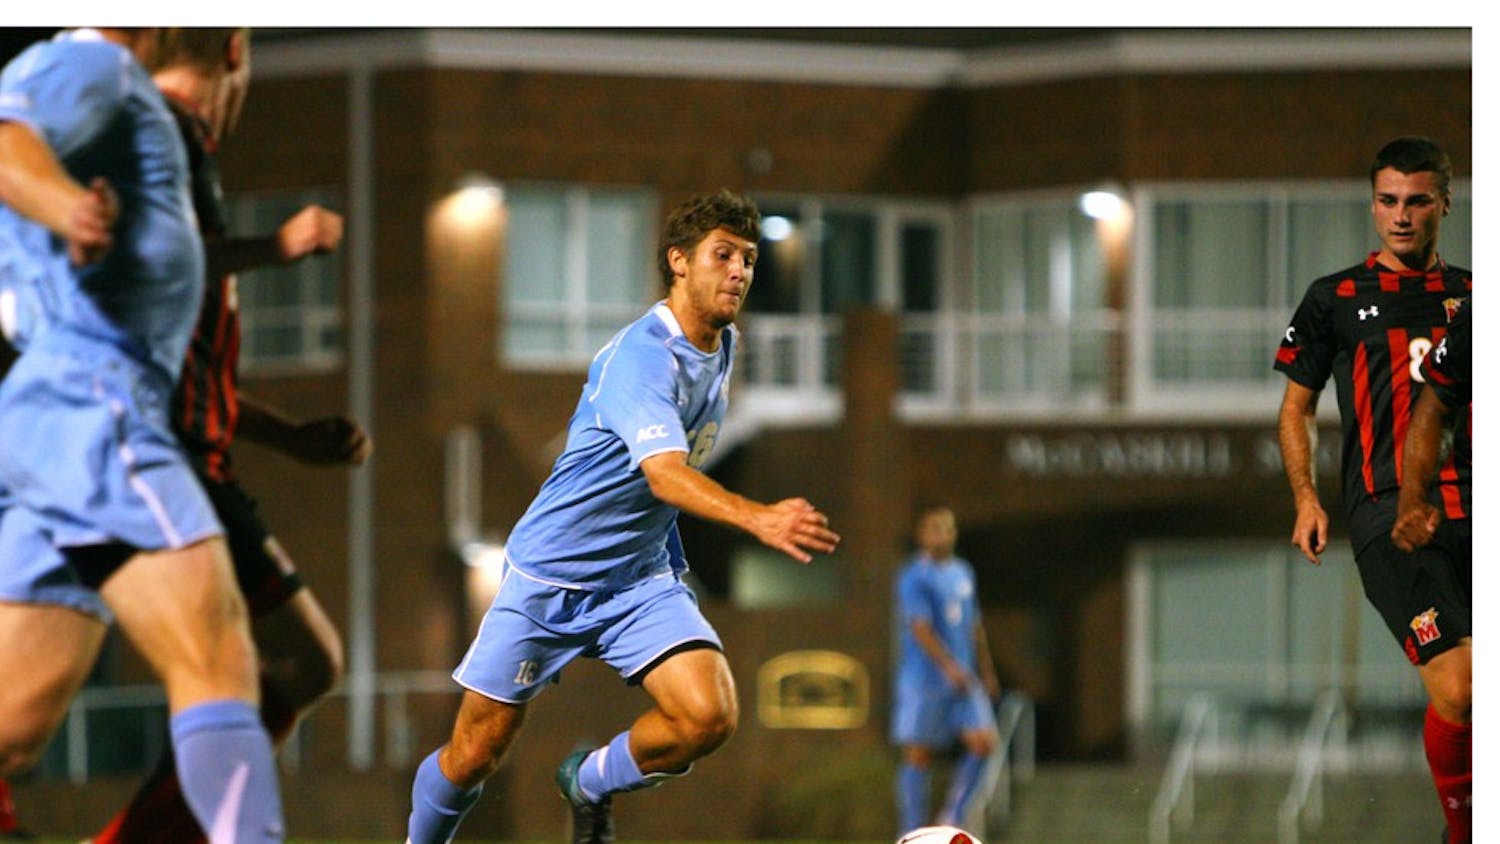 Sophomore Enzo Martinez and his family left Uruguay when he was 10. Martinez set a high school record with 182 goals before coming to UNC, where he has recorded five game-winning goals for the Tar Heels.